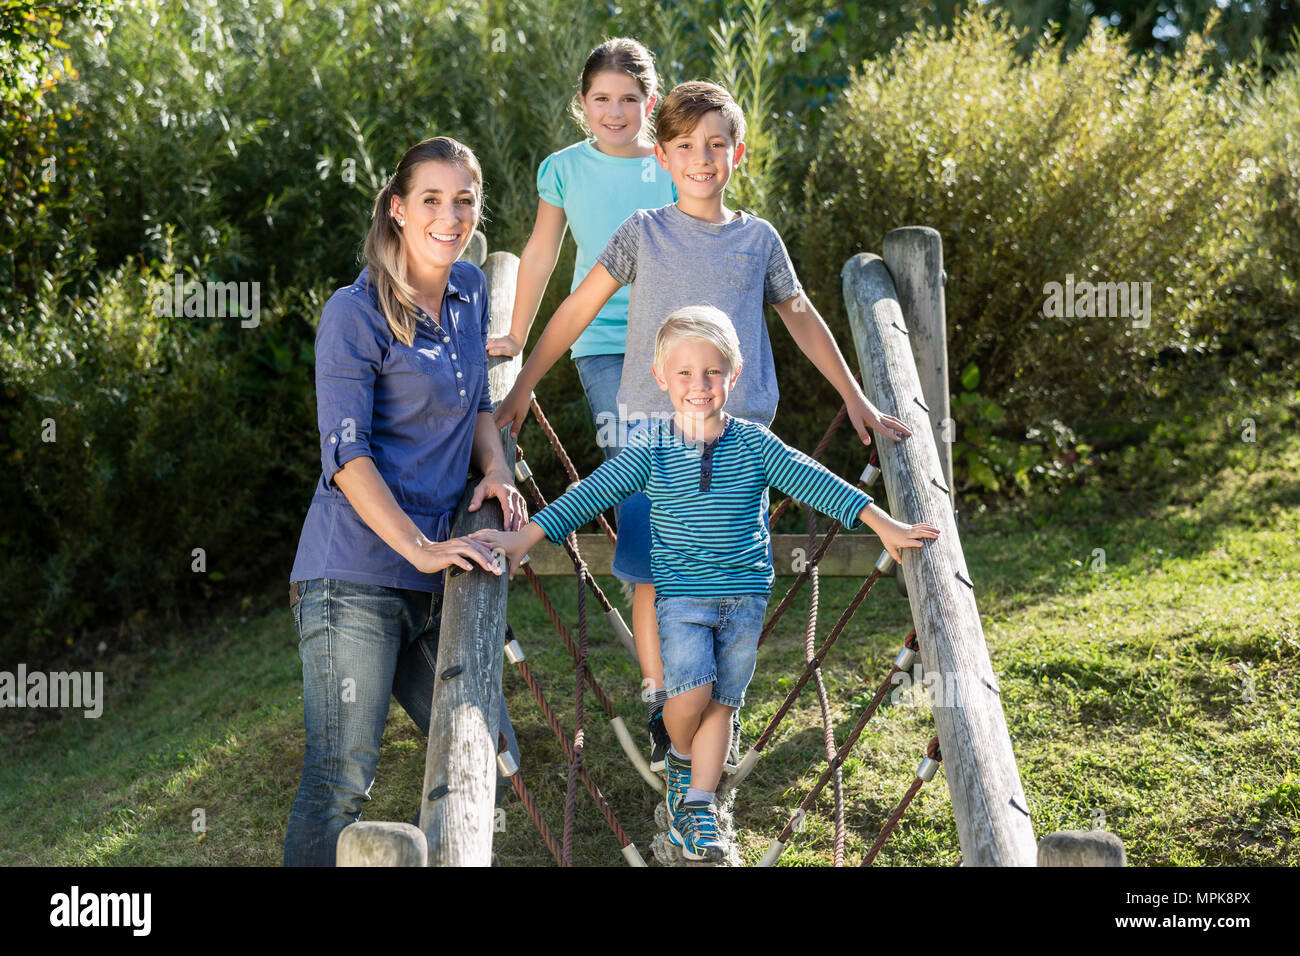 Family with kids playing on adventure playground Stock Photo